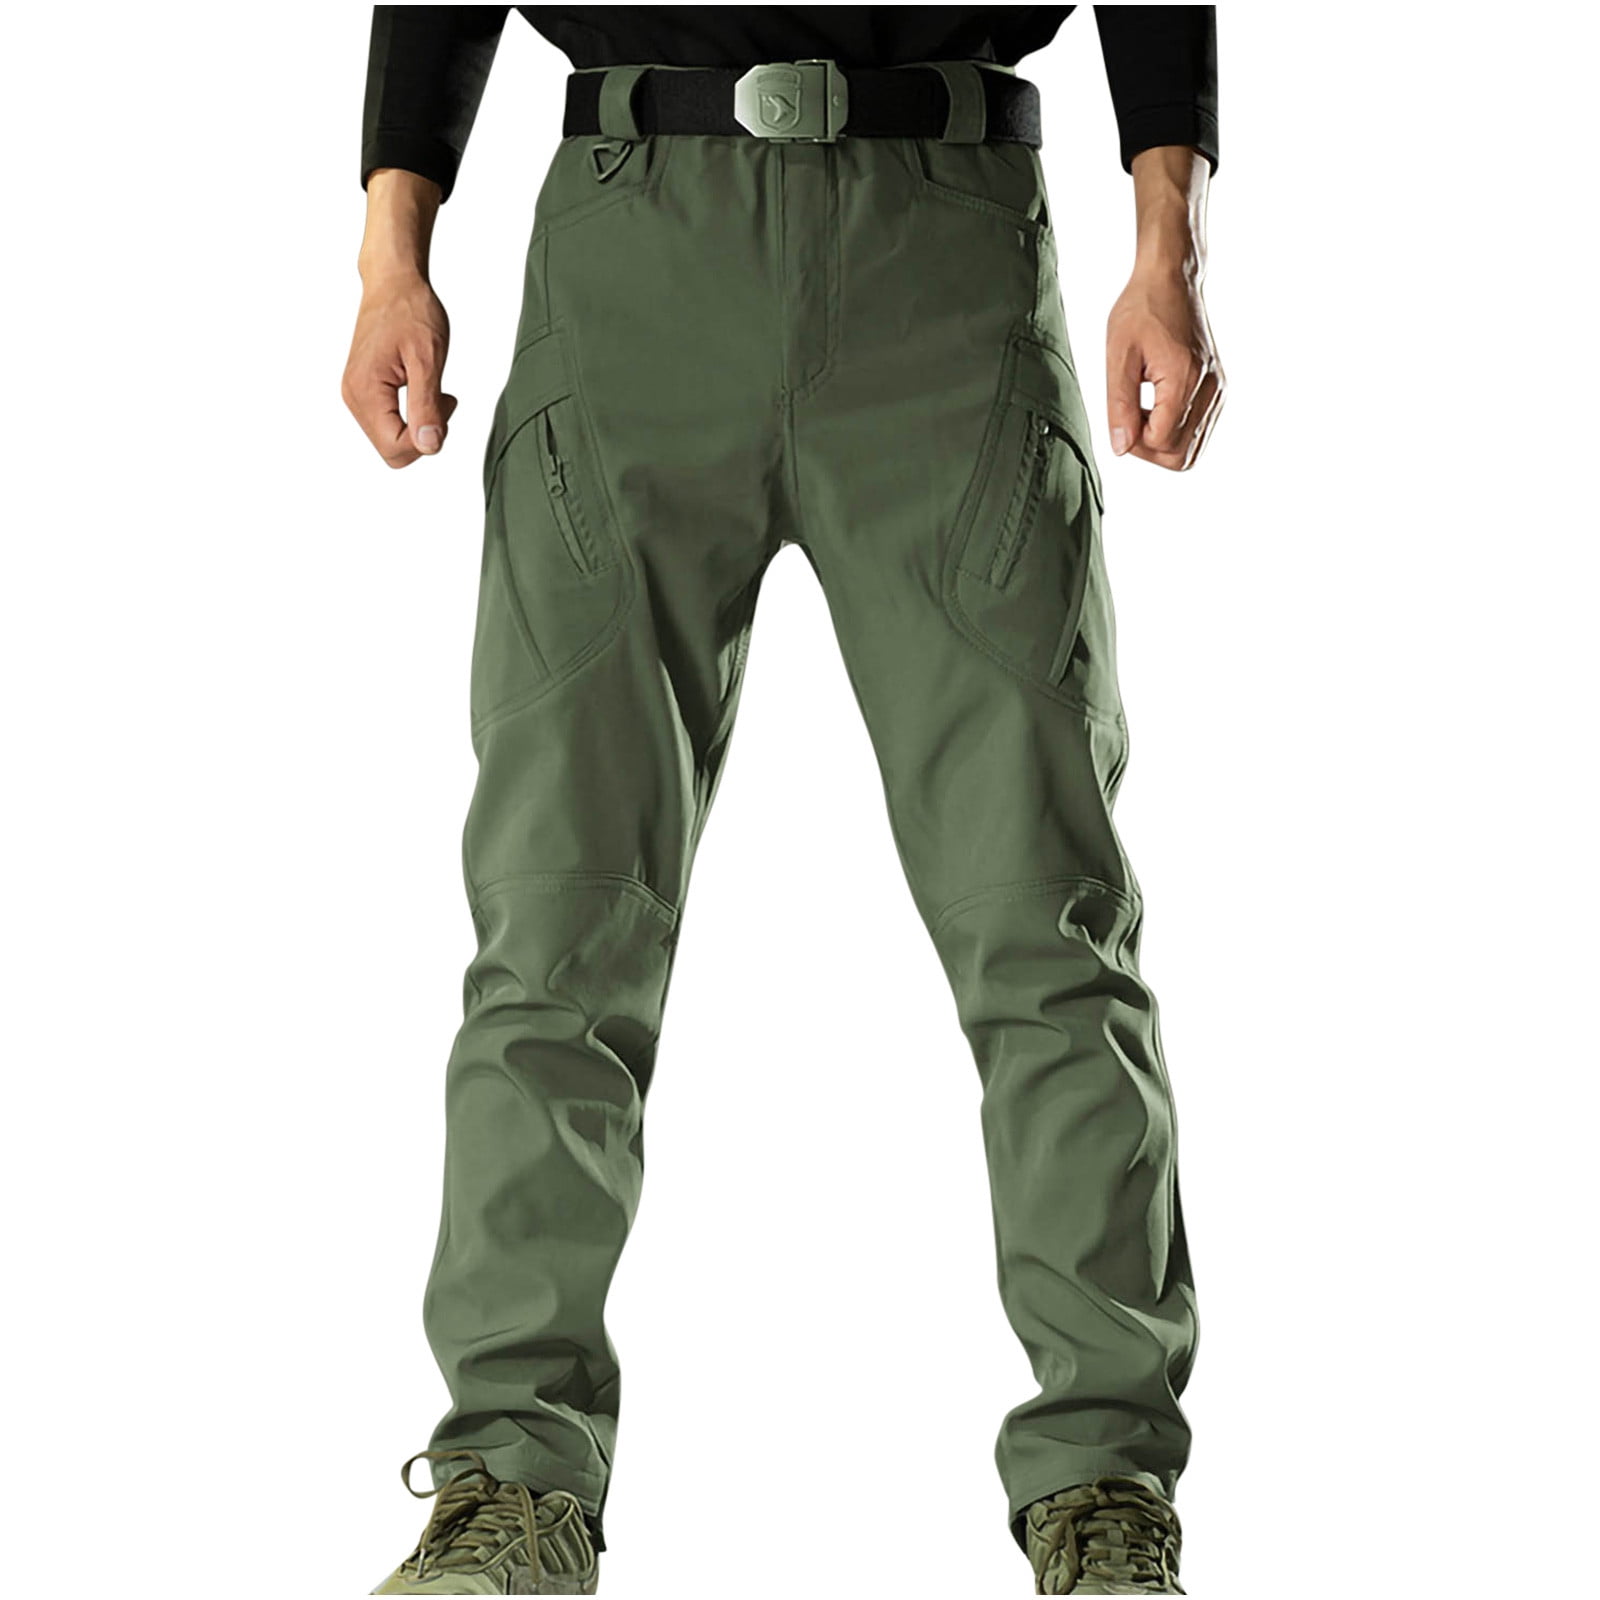 Buy V3E Men's Casual Relaxed Fit Cargo Pants Hiking Trousers Cotton Twill  Combat Pants (Black, 32) at Amazon.in